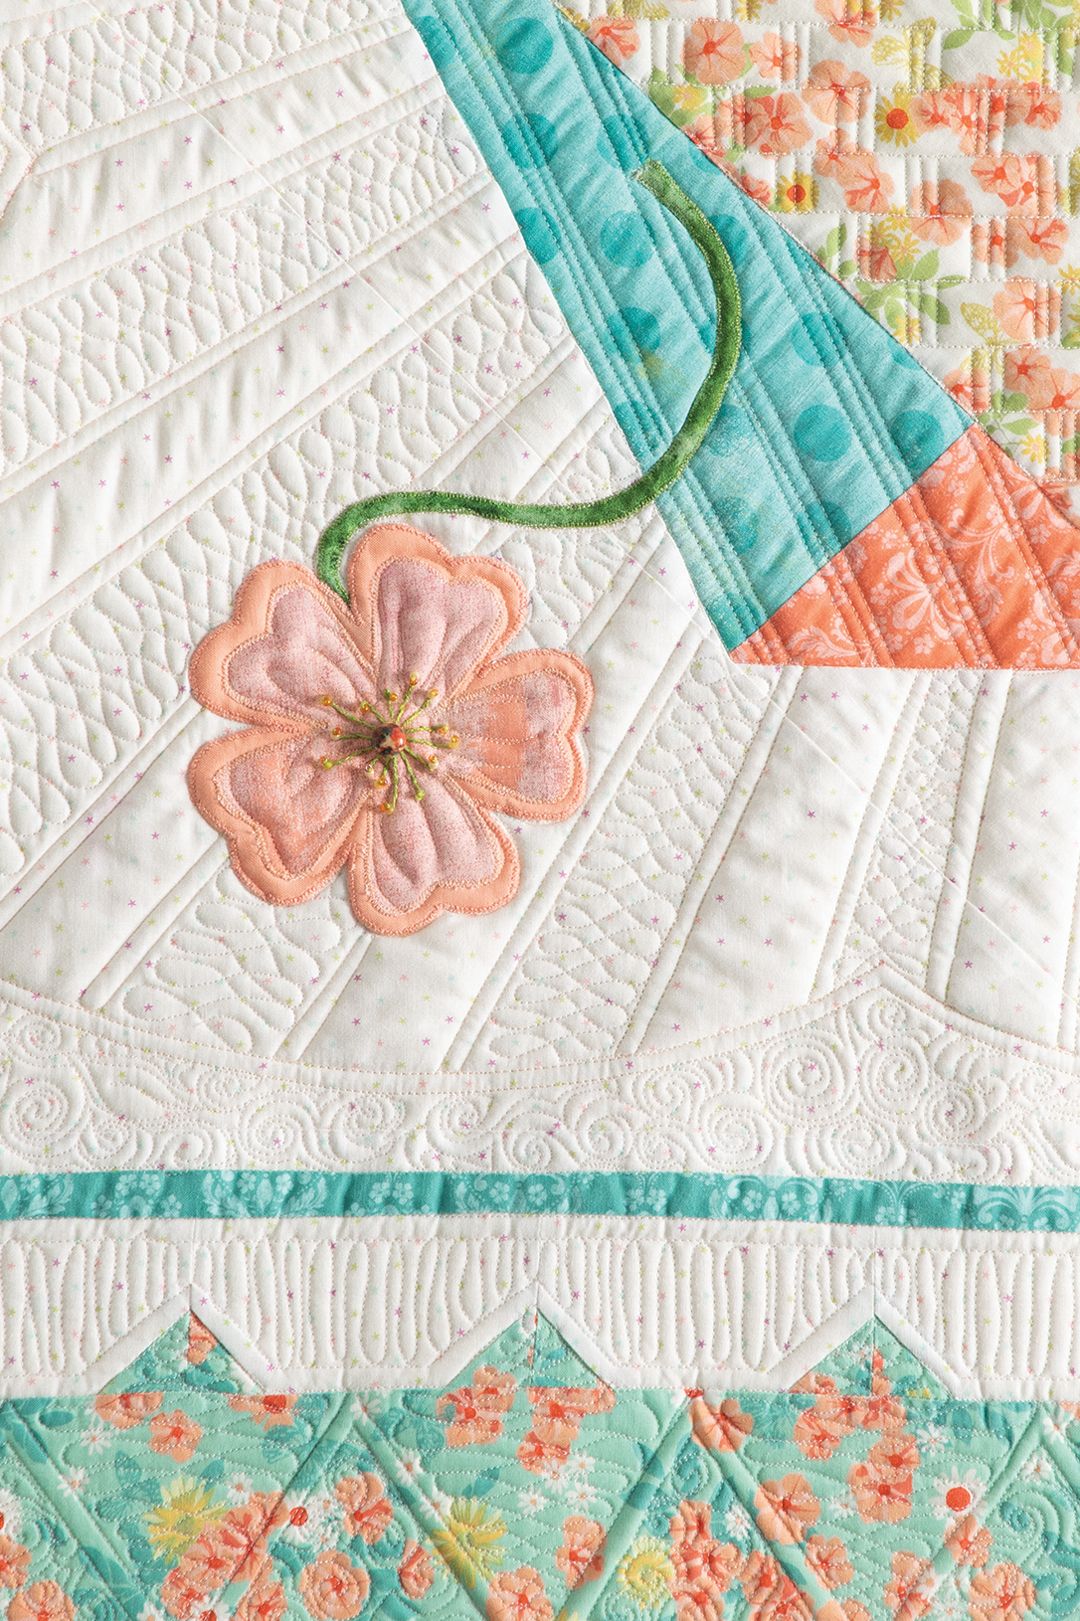 McCall's Quilting March/April 2023 Print Edition